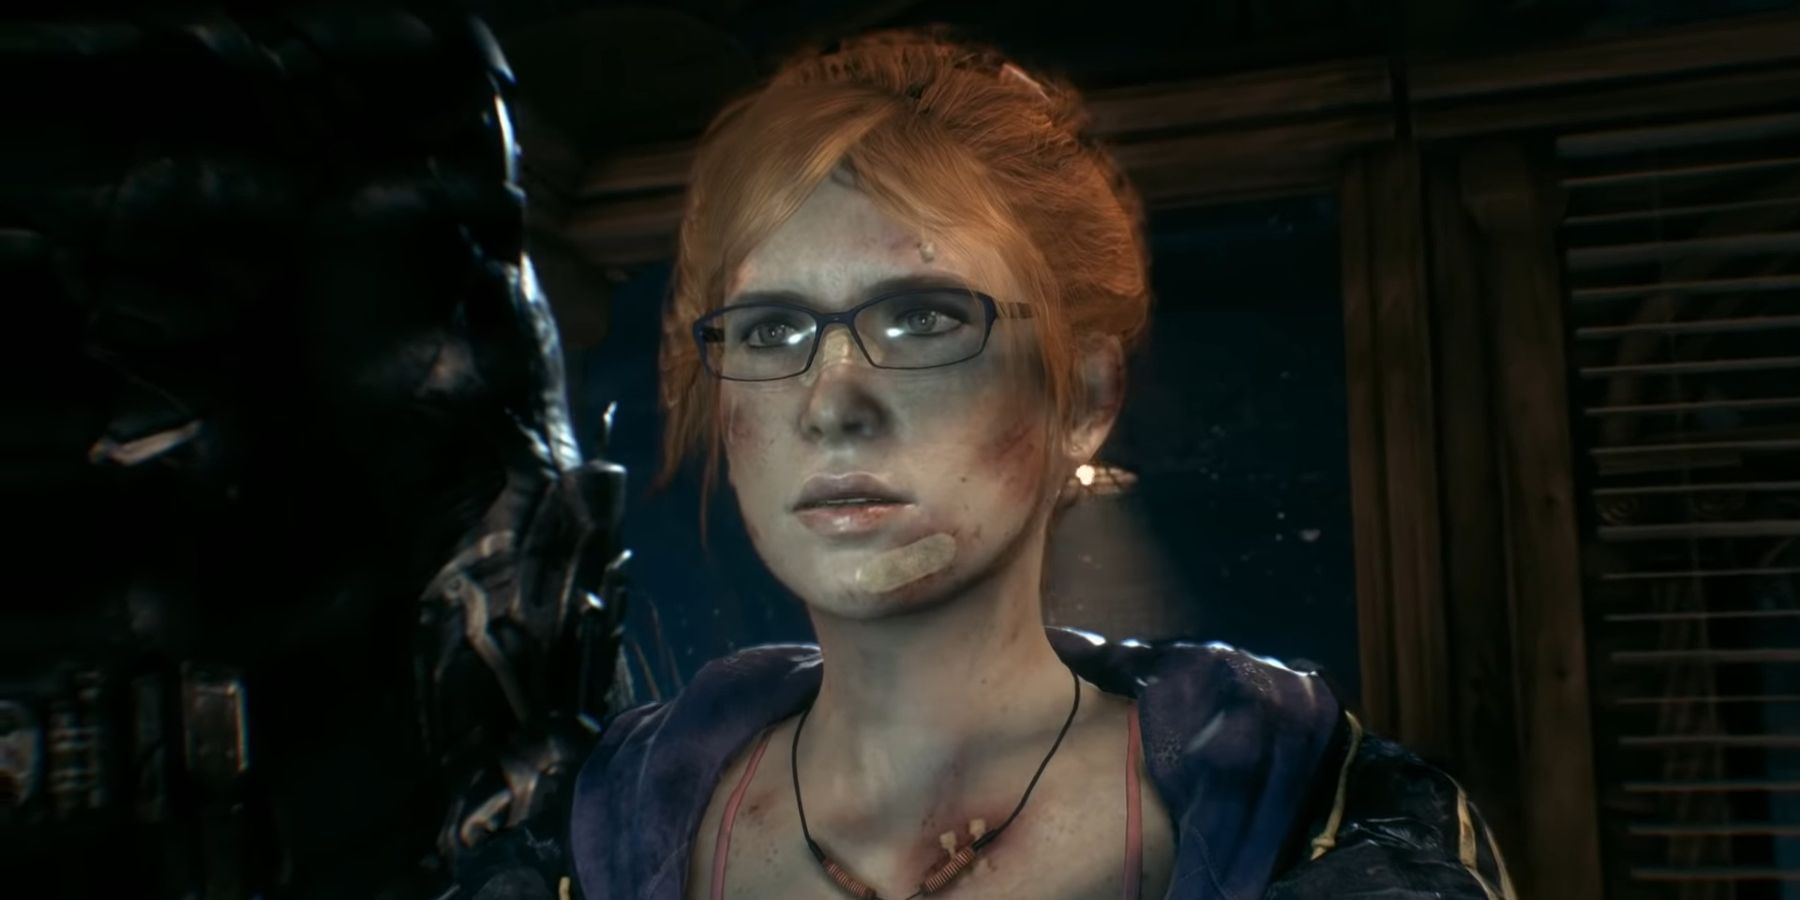 Barbara Gordon as Oracle operating from the GCPD in Batman: Arkham Knight